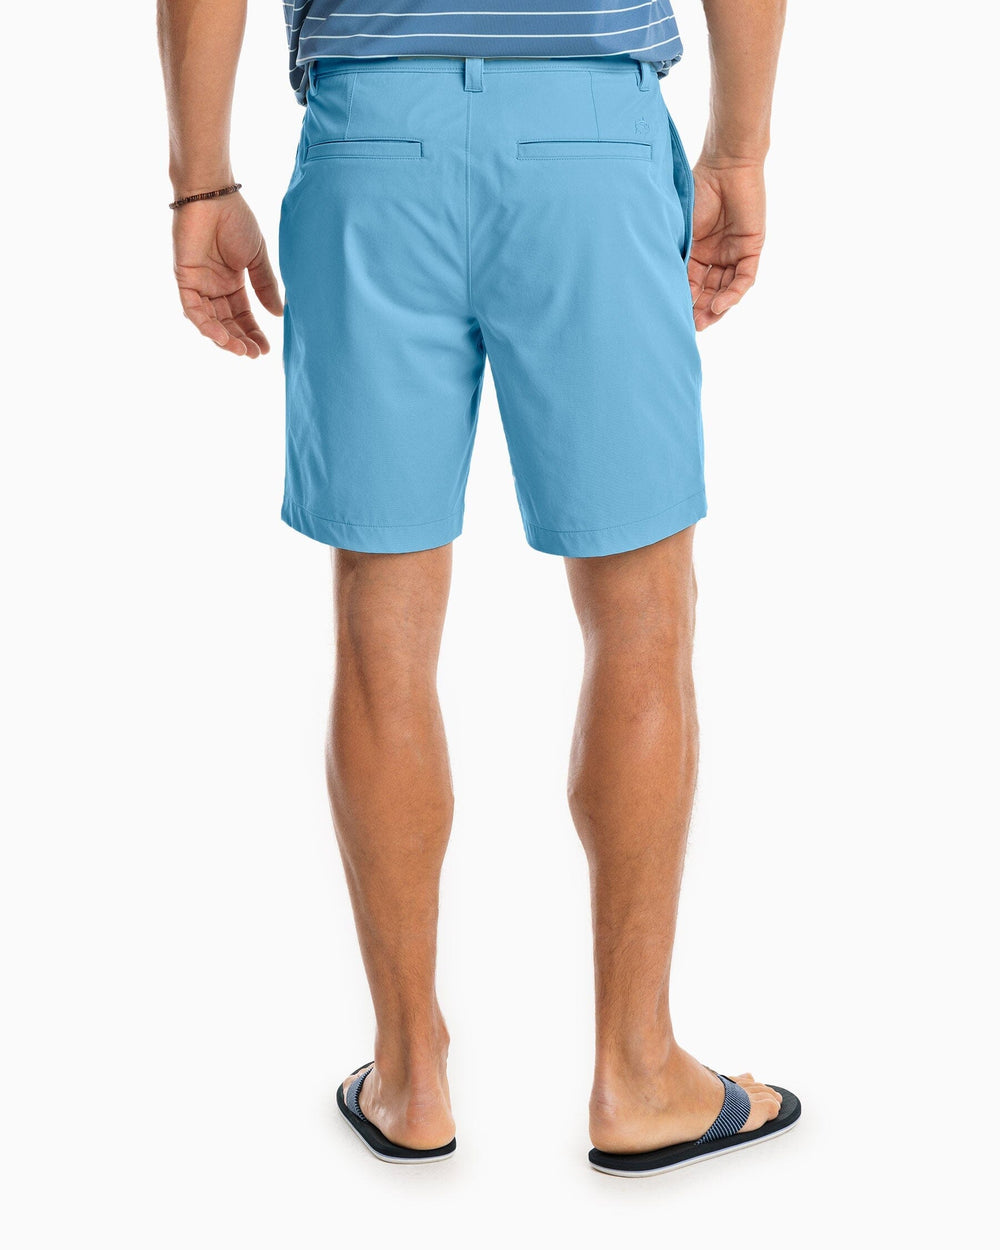 The back of the Men's Gulf 8 Inch Brrr Performance Short by Southern Tide - Boat Blue